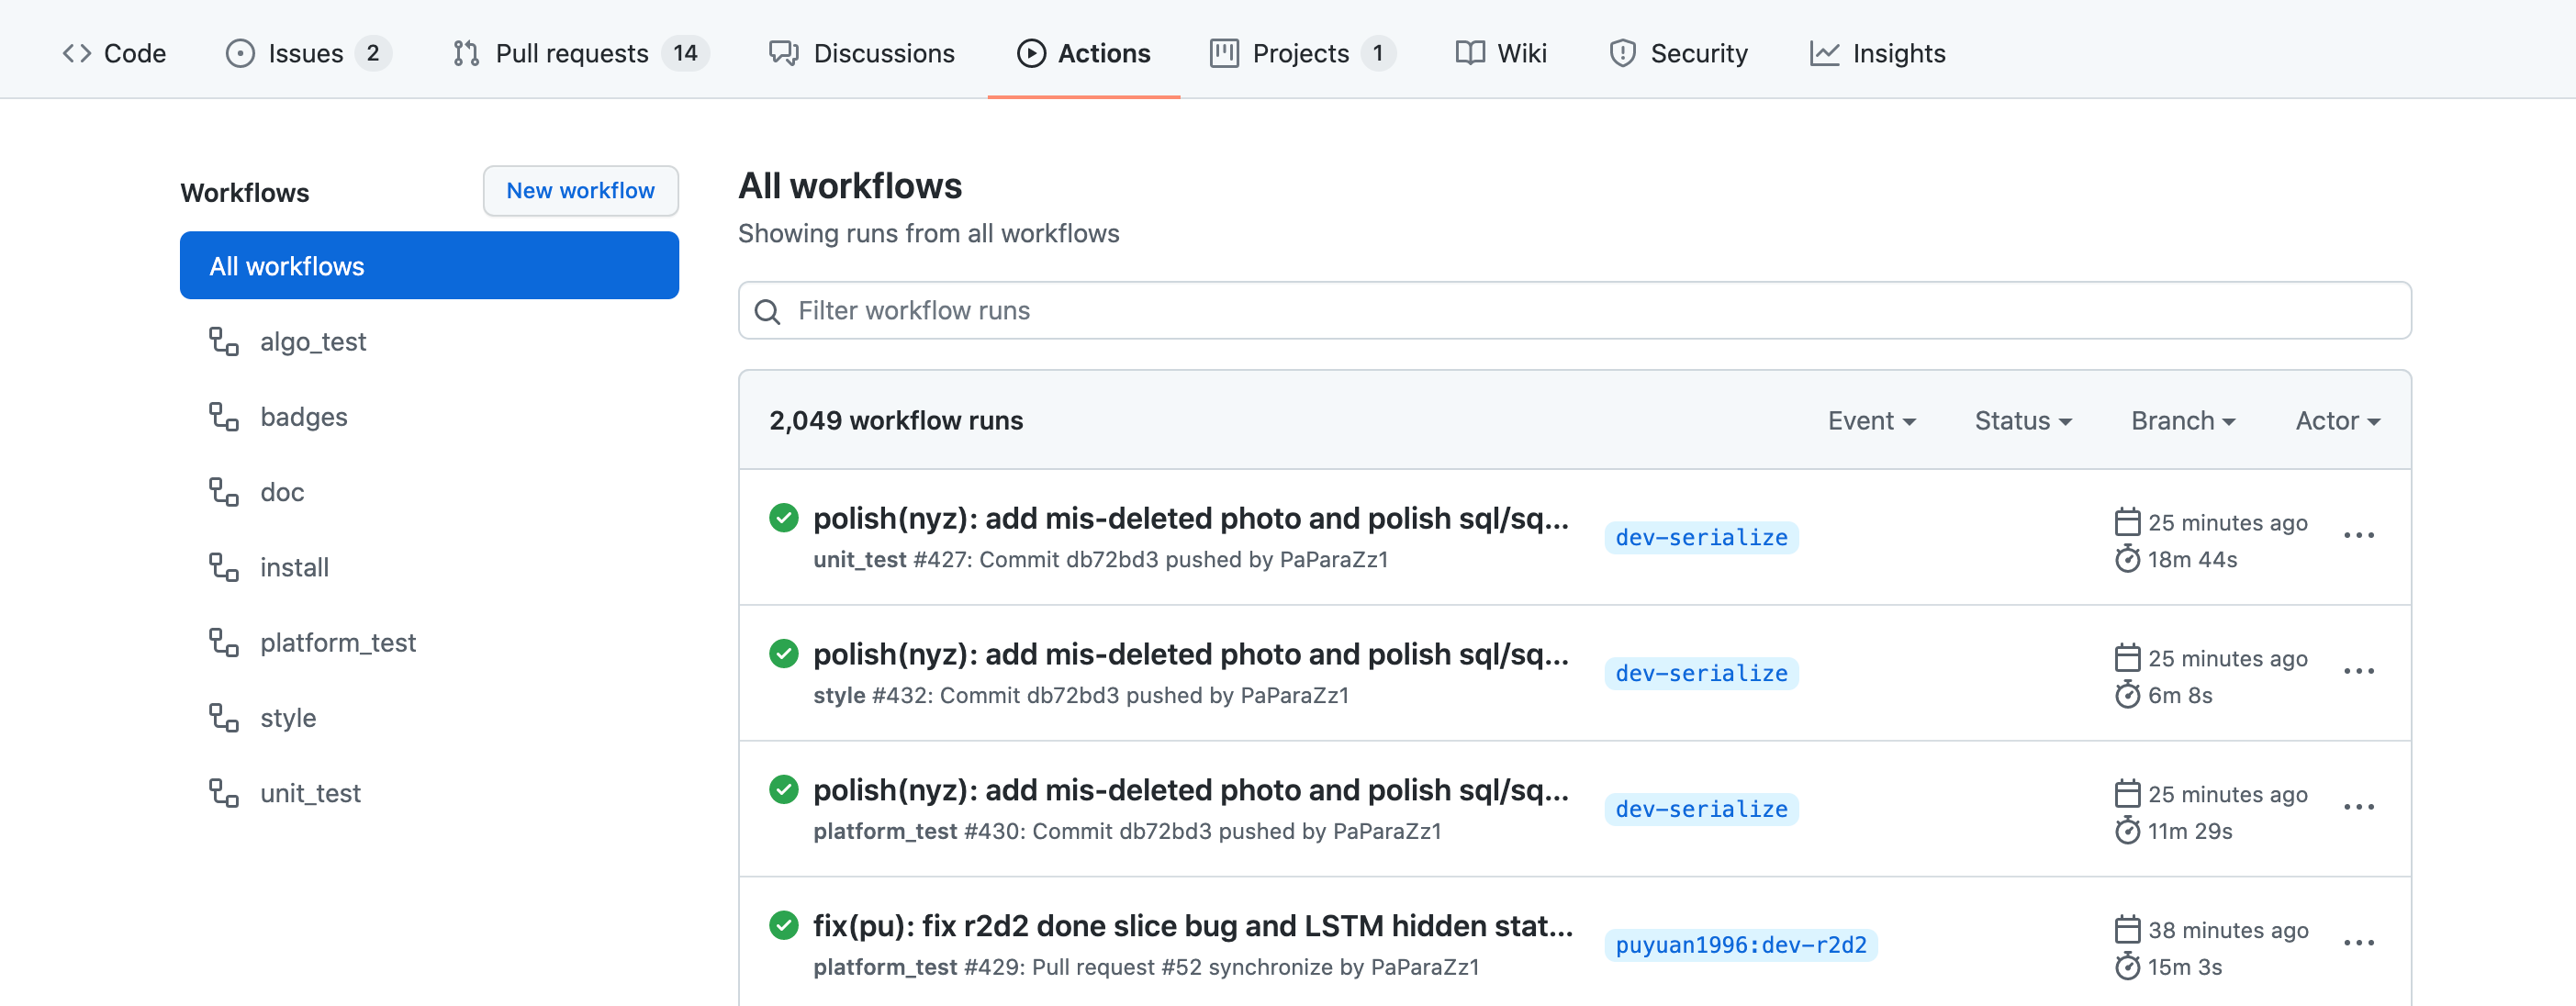 _images/github_actions_all.png